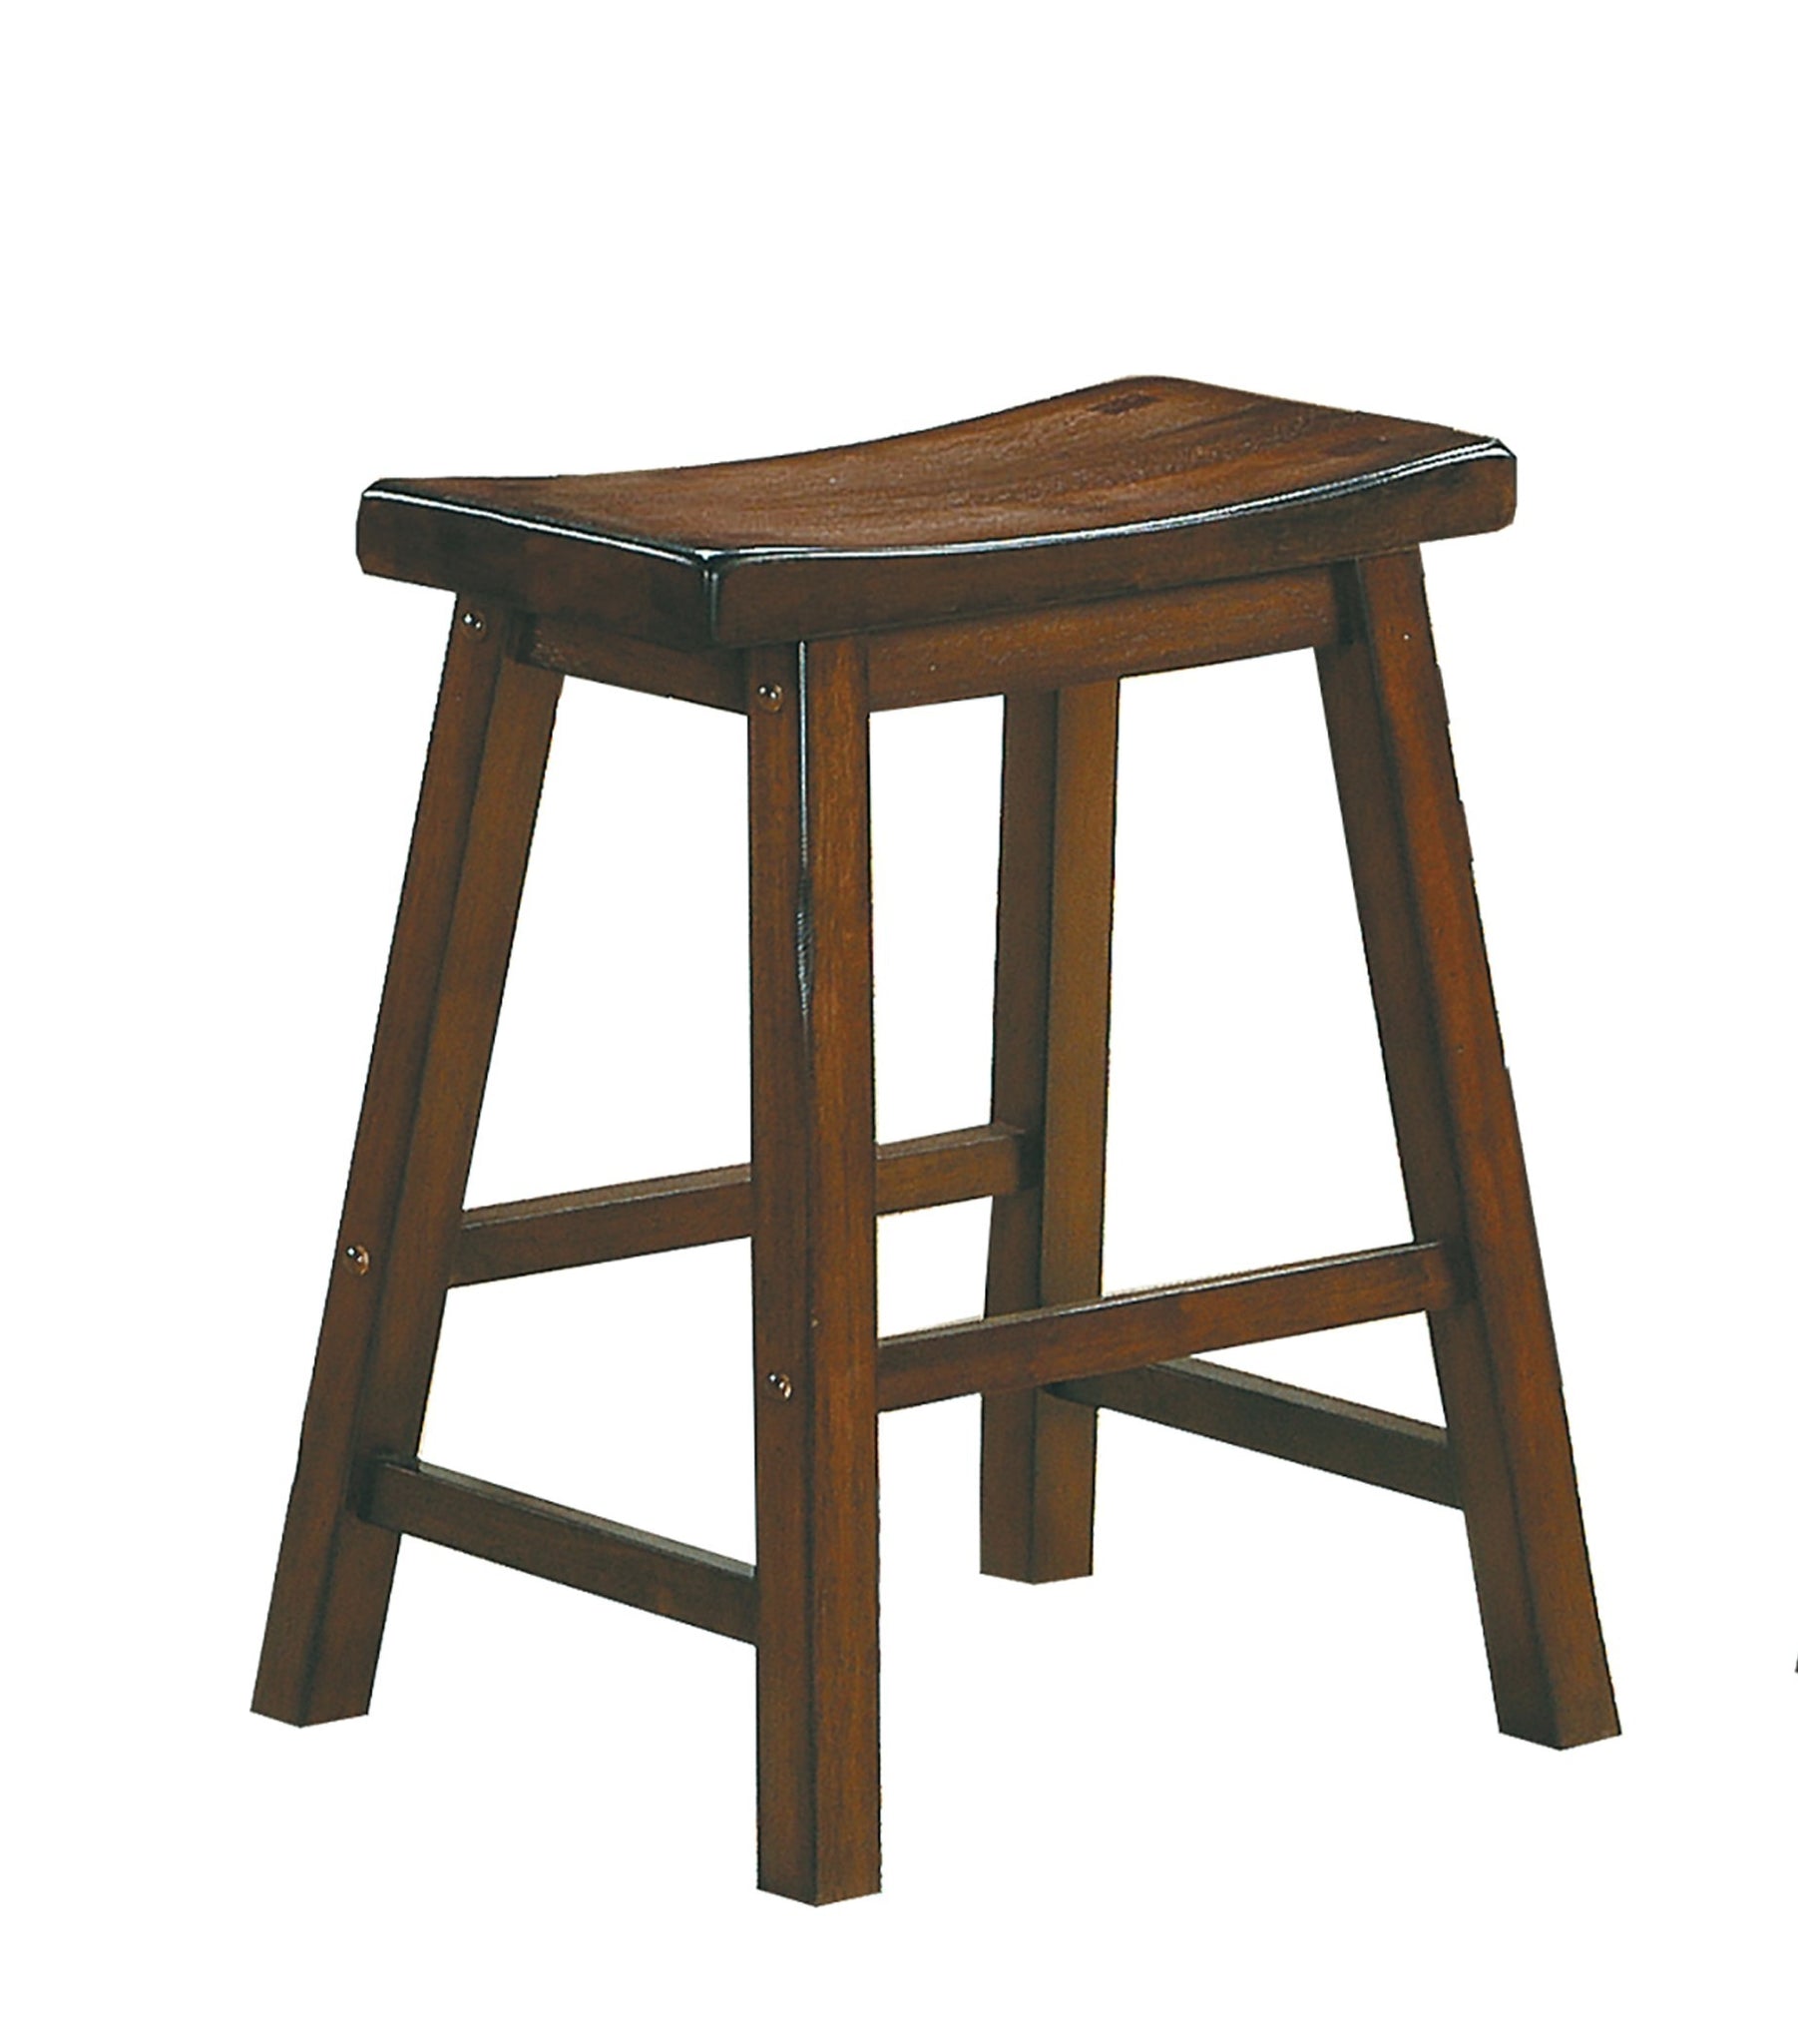 18 inch Height Saddle Seat Stools 2pc Set Solid Wood brown mix-dining room-solid wood